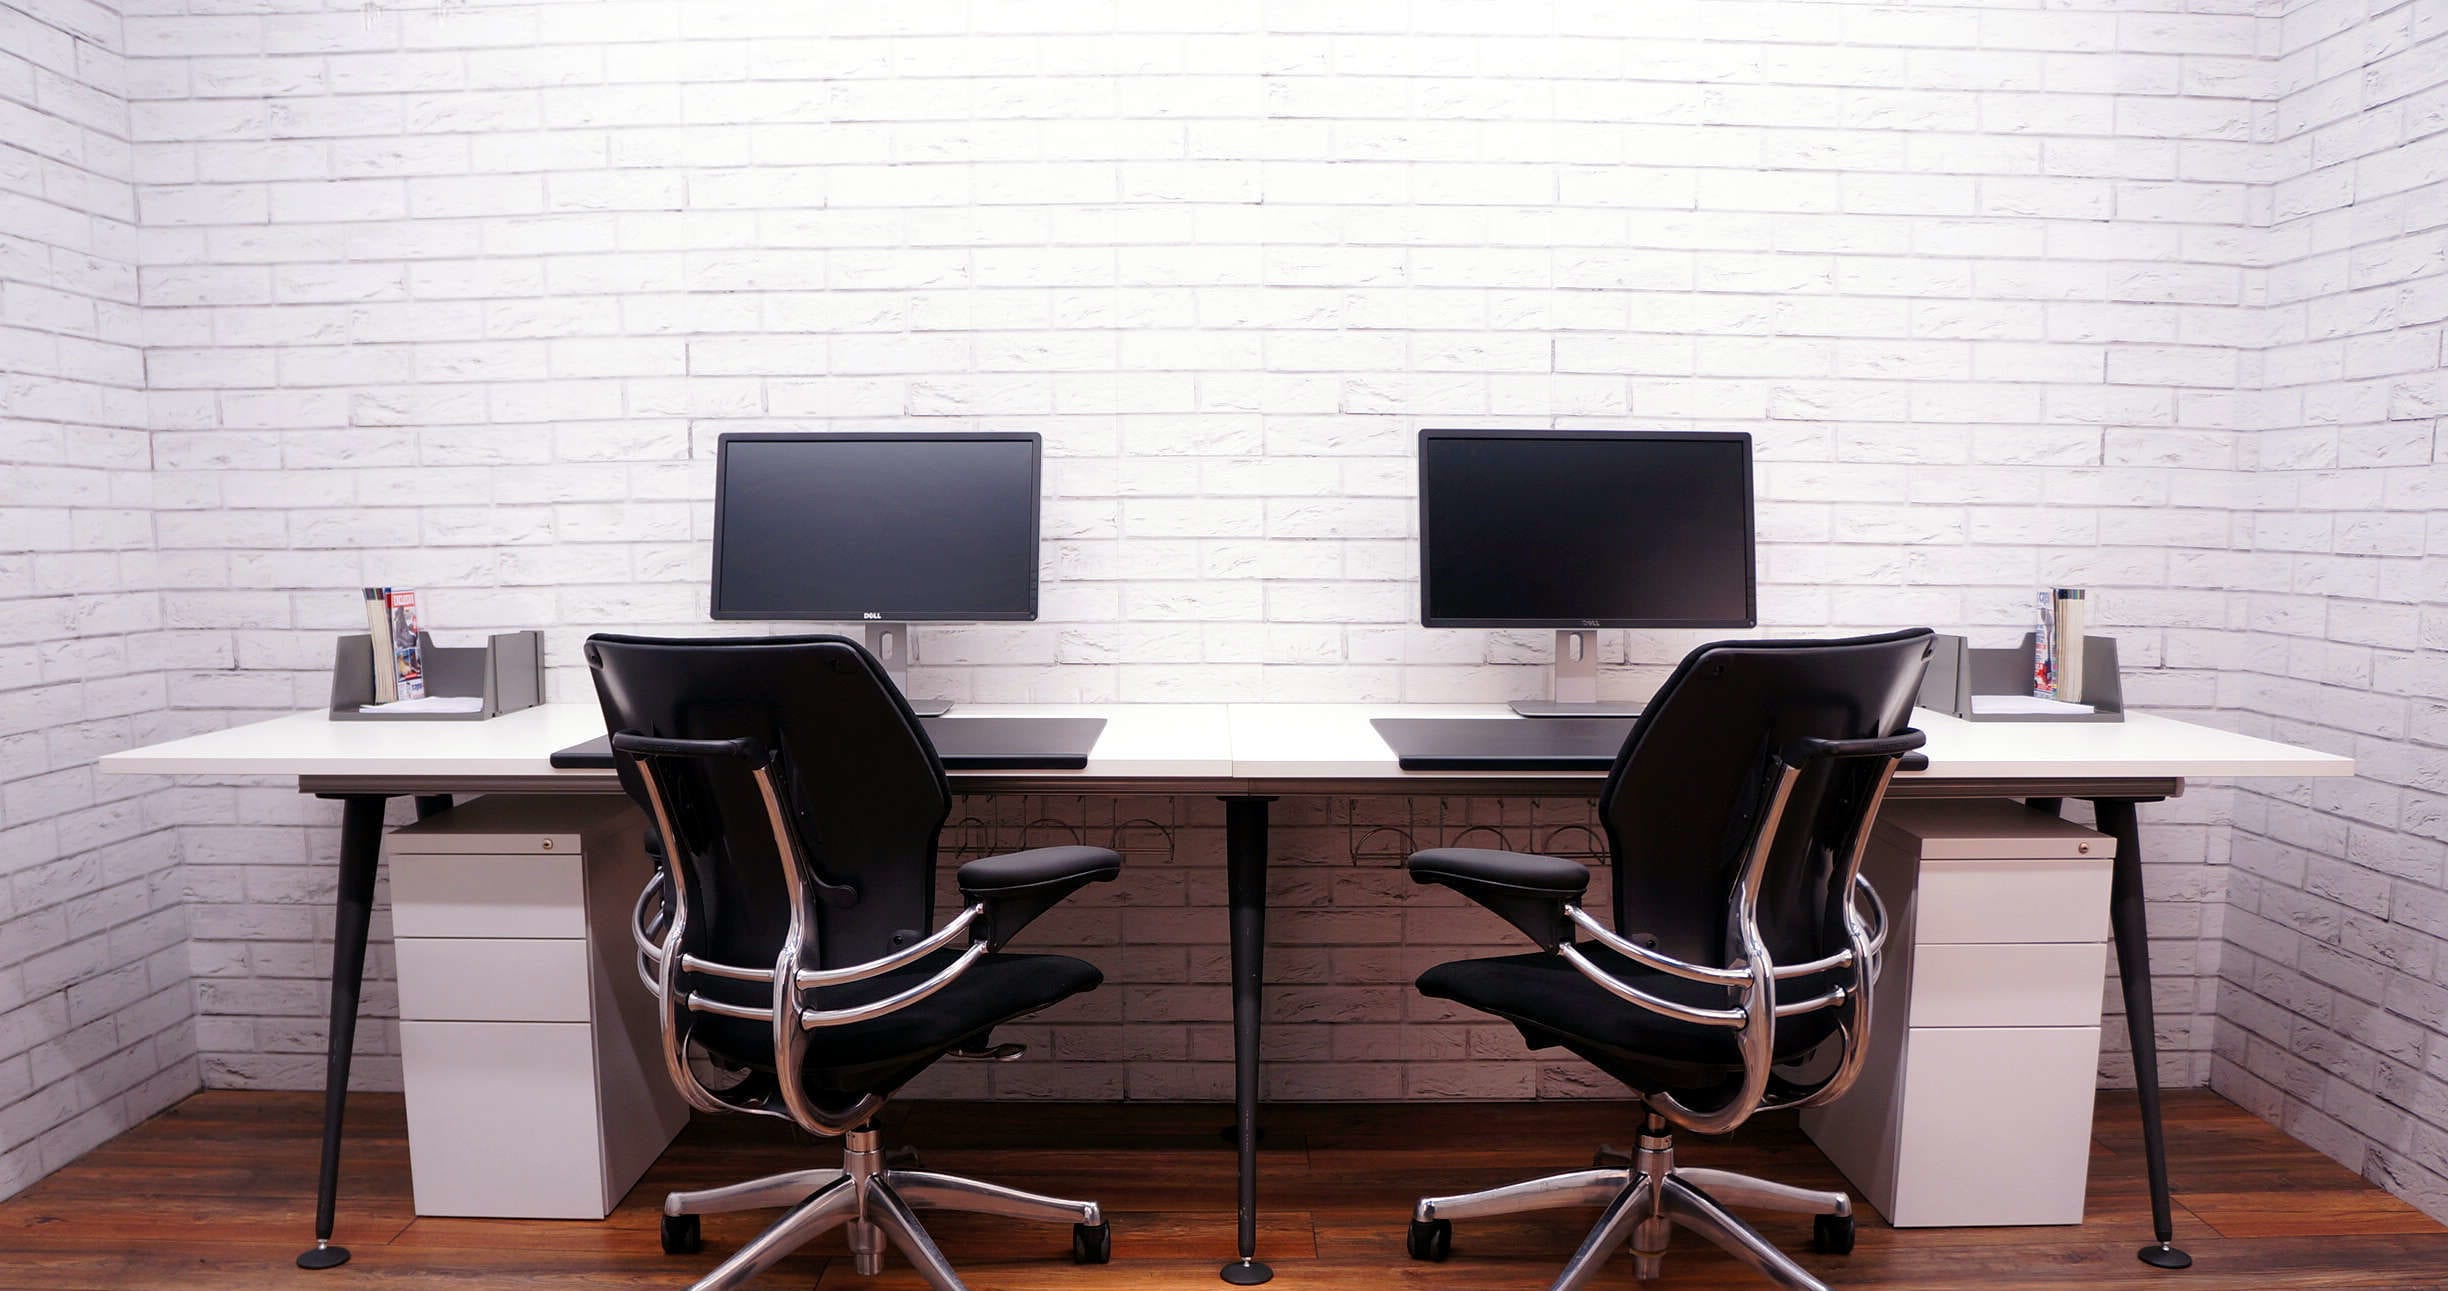 Office Resale - Quality Used Office Furniture - Crown Workspace UK